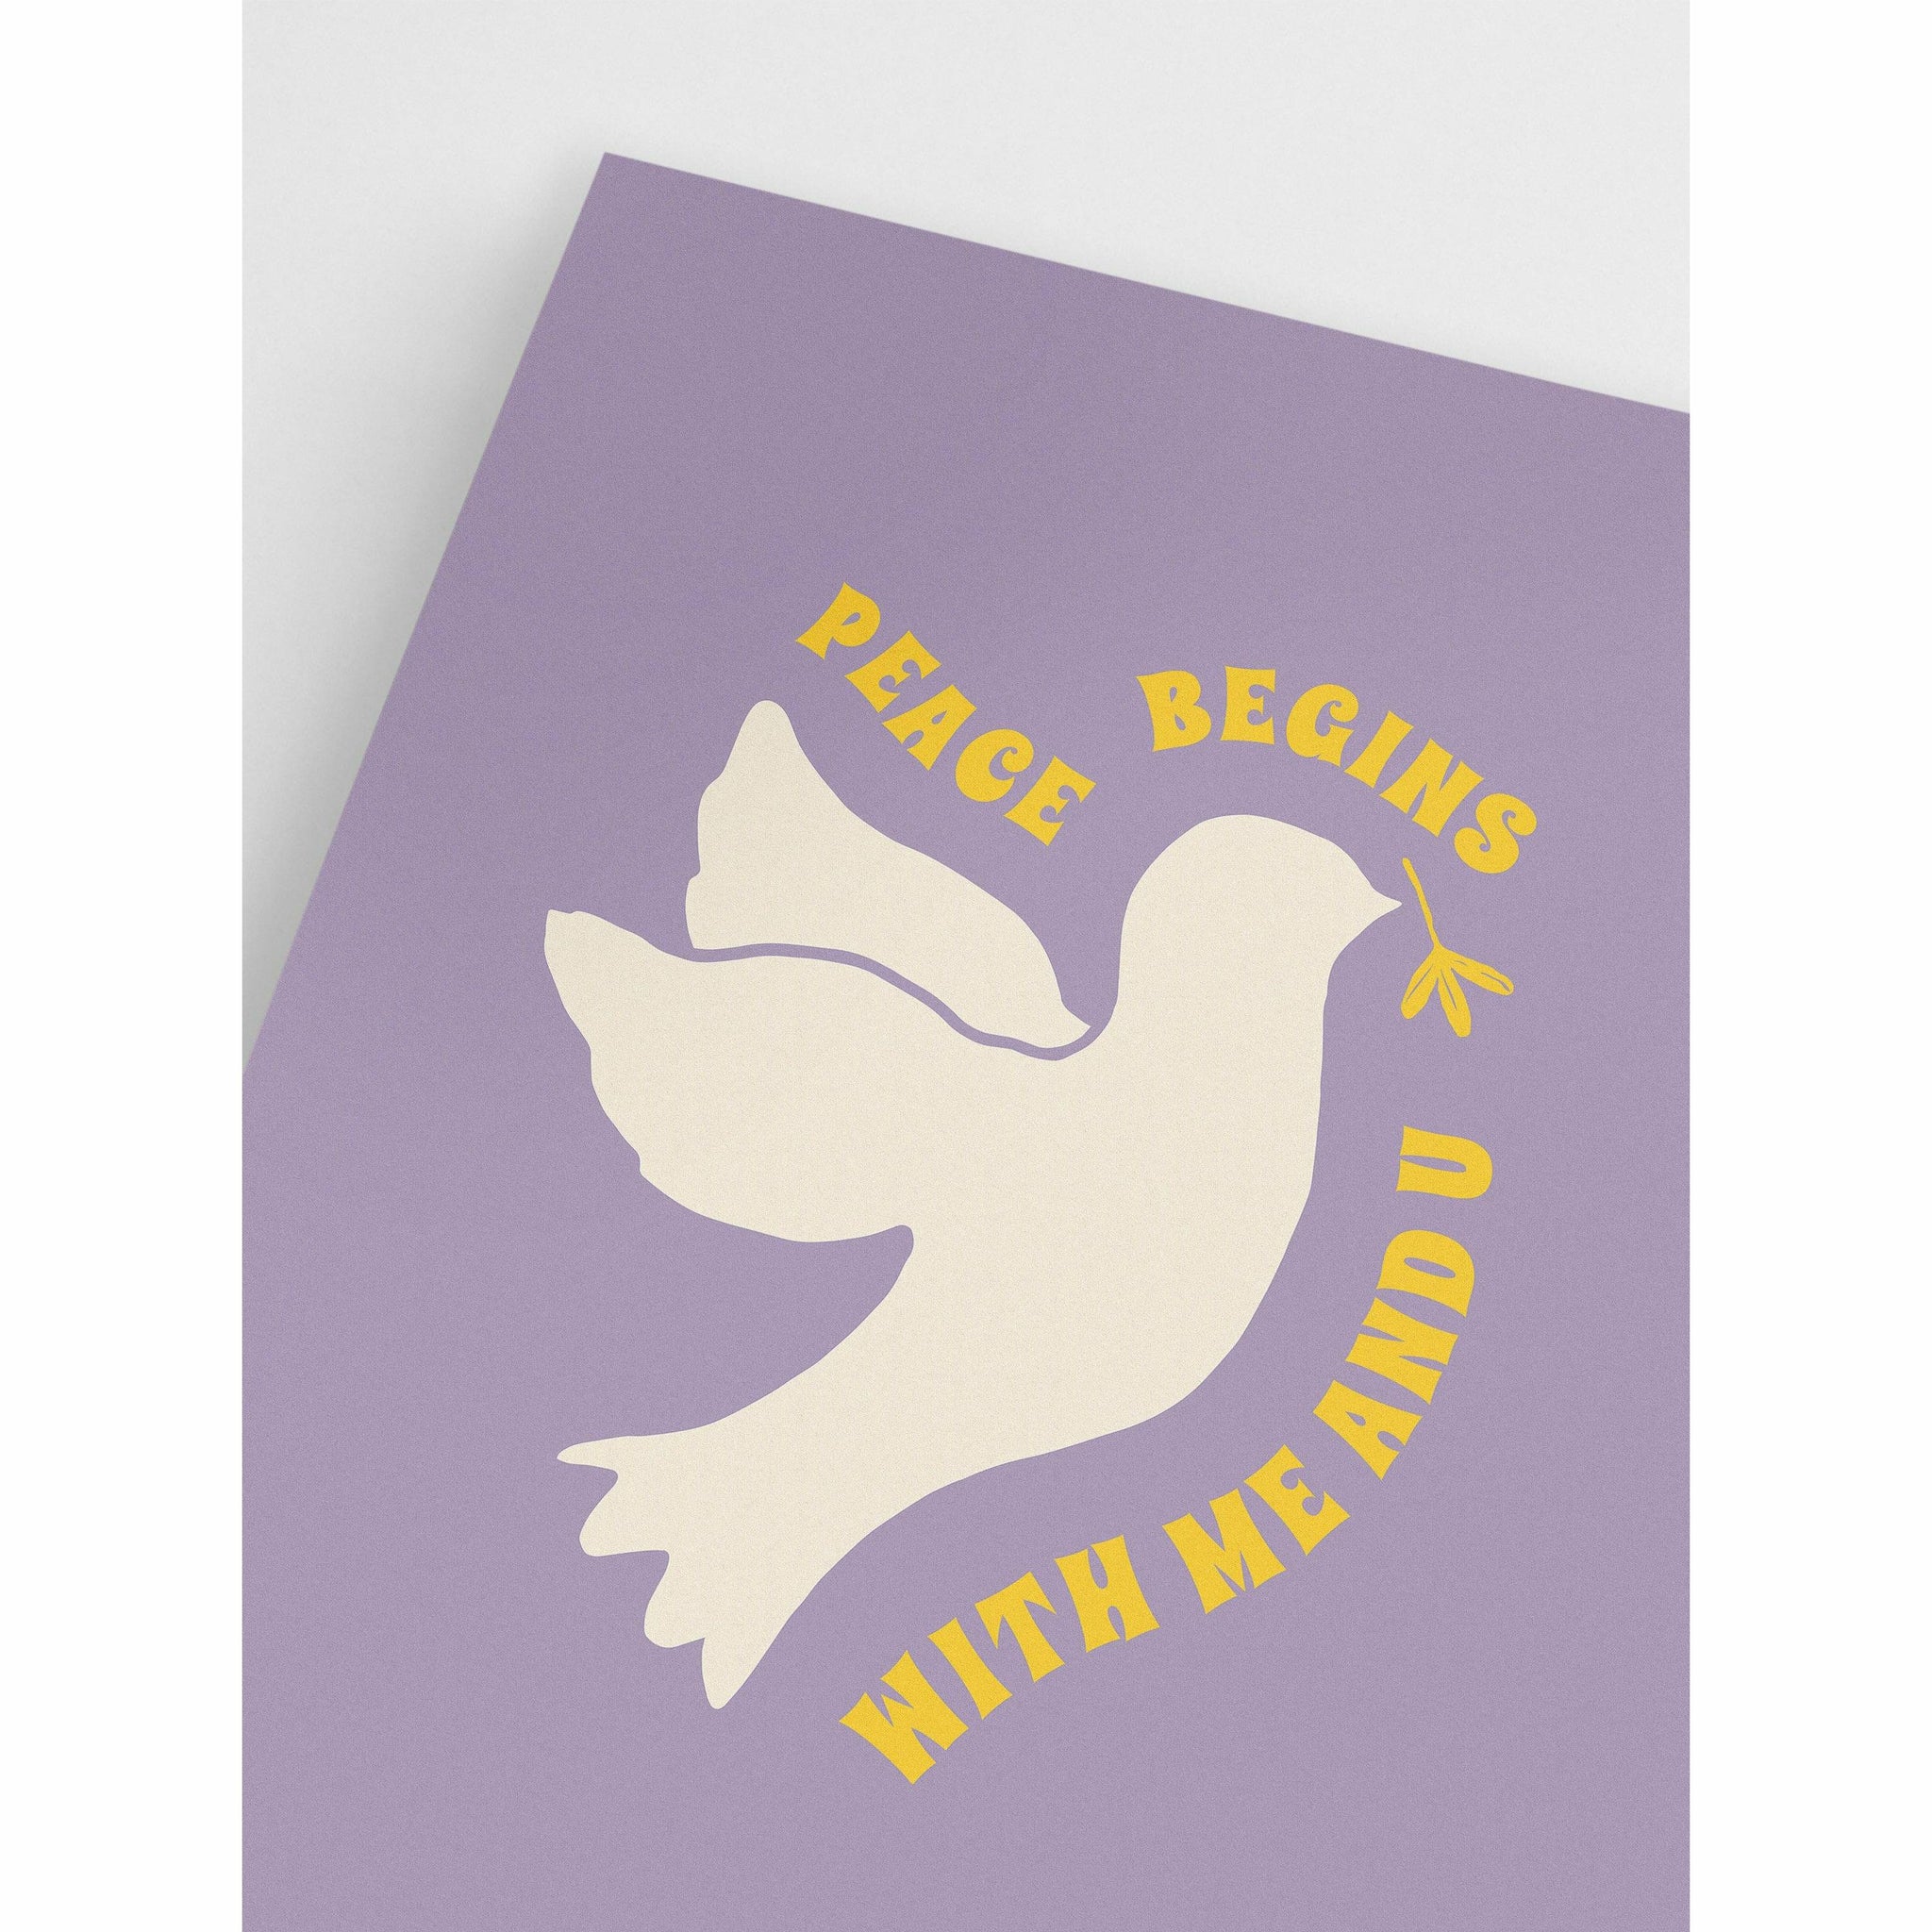 Peace begins with me and u Poster